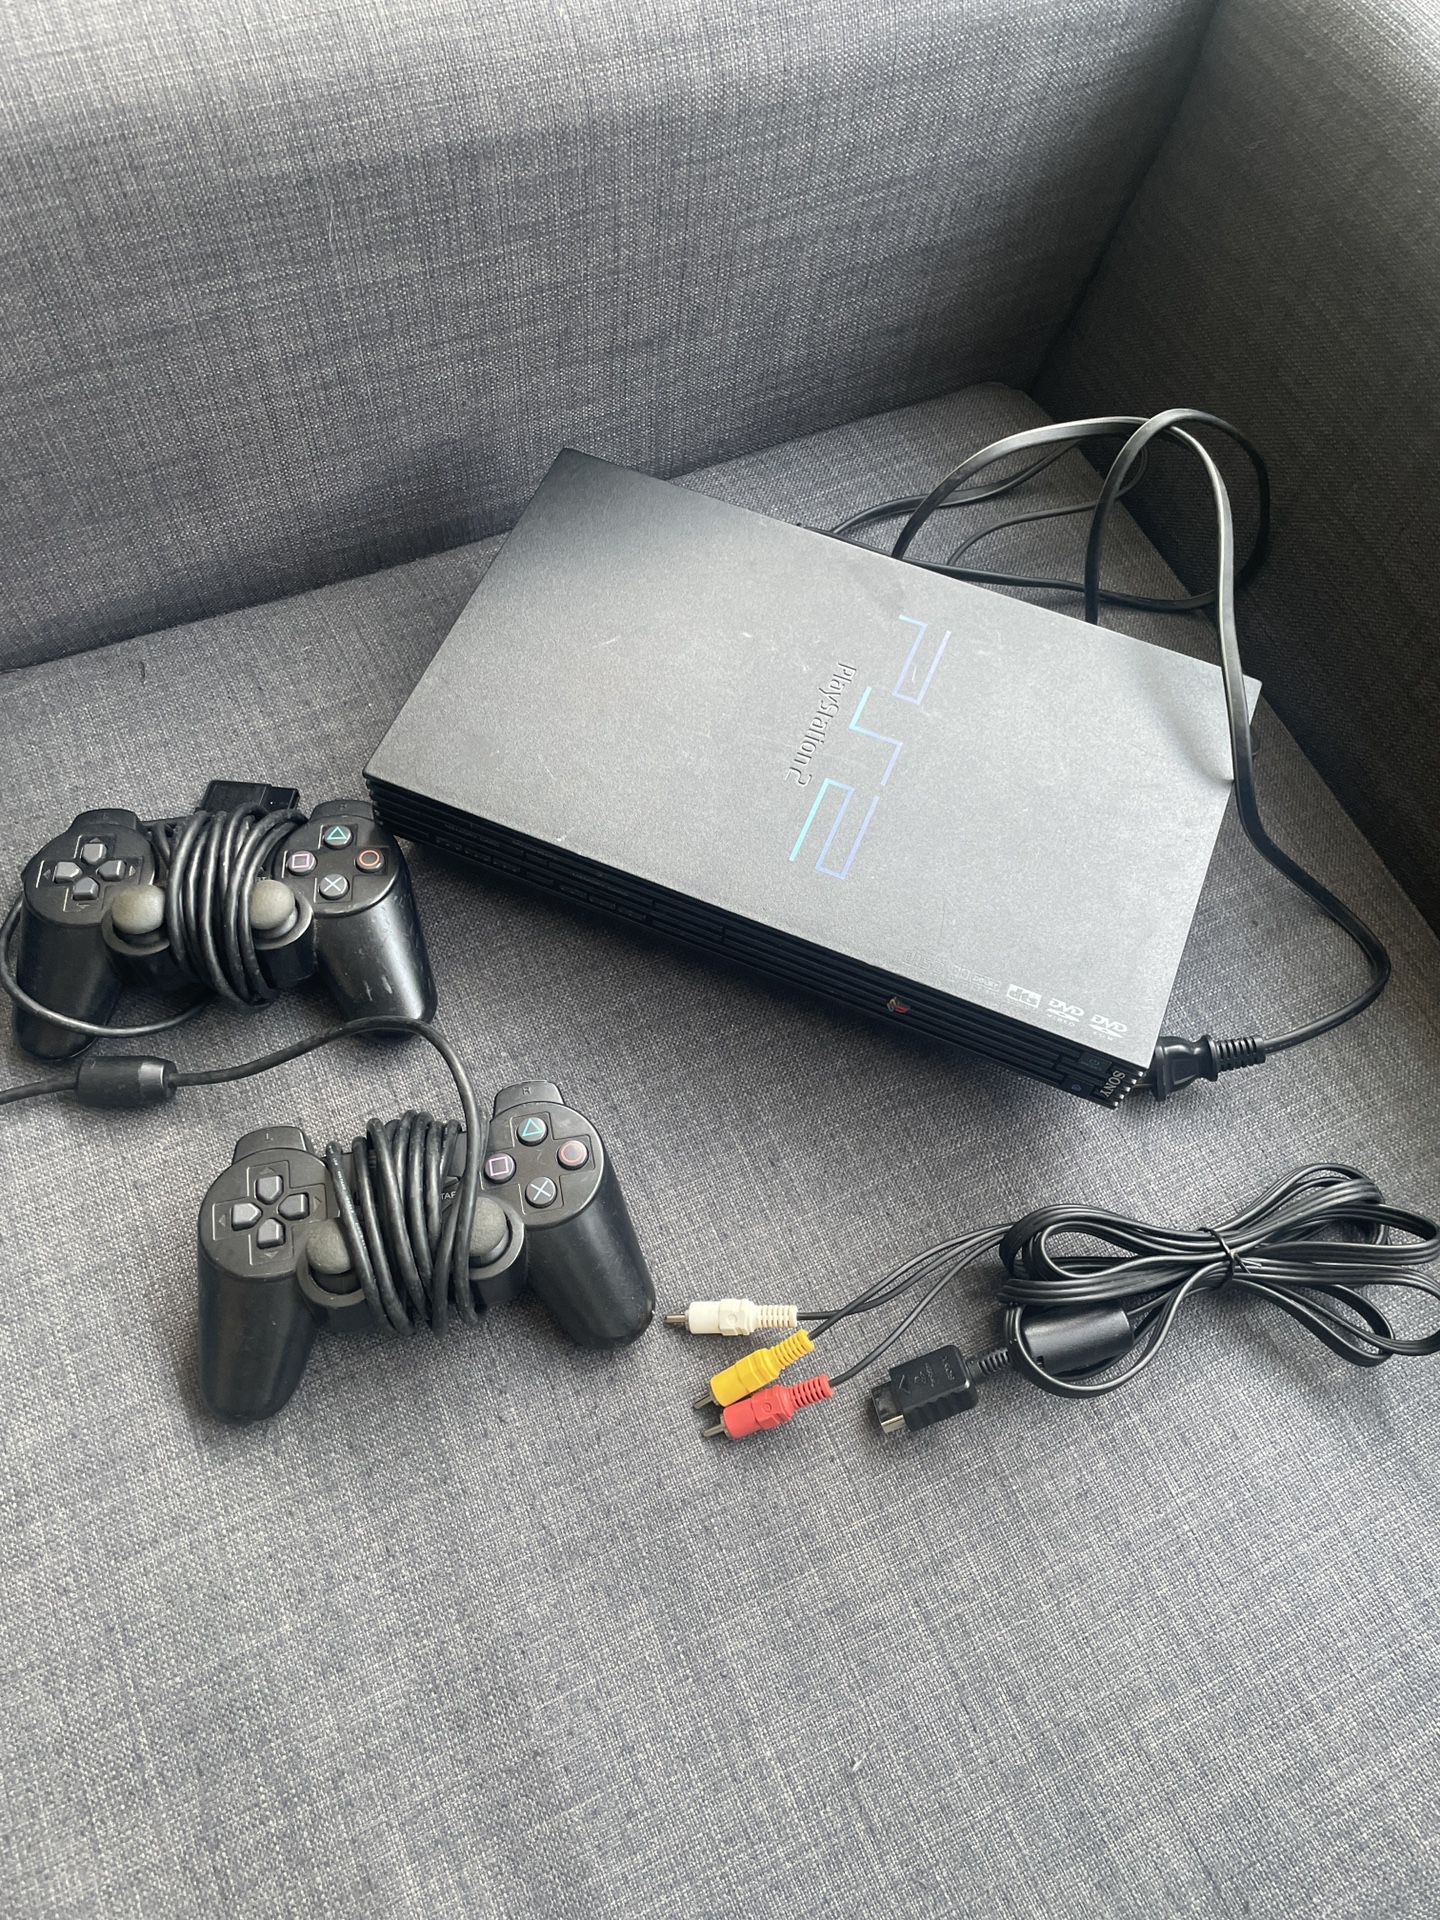 PS2 PlayStation 2 (tested & working)